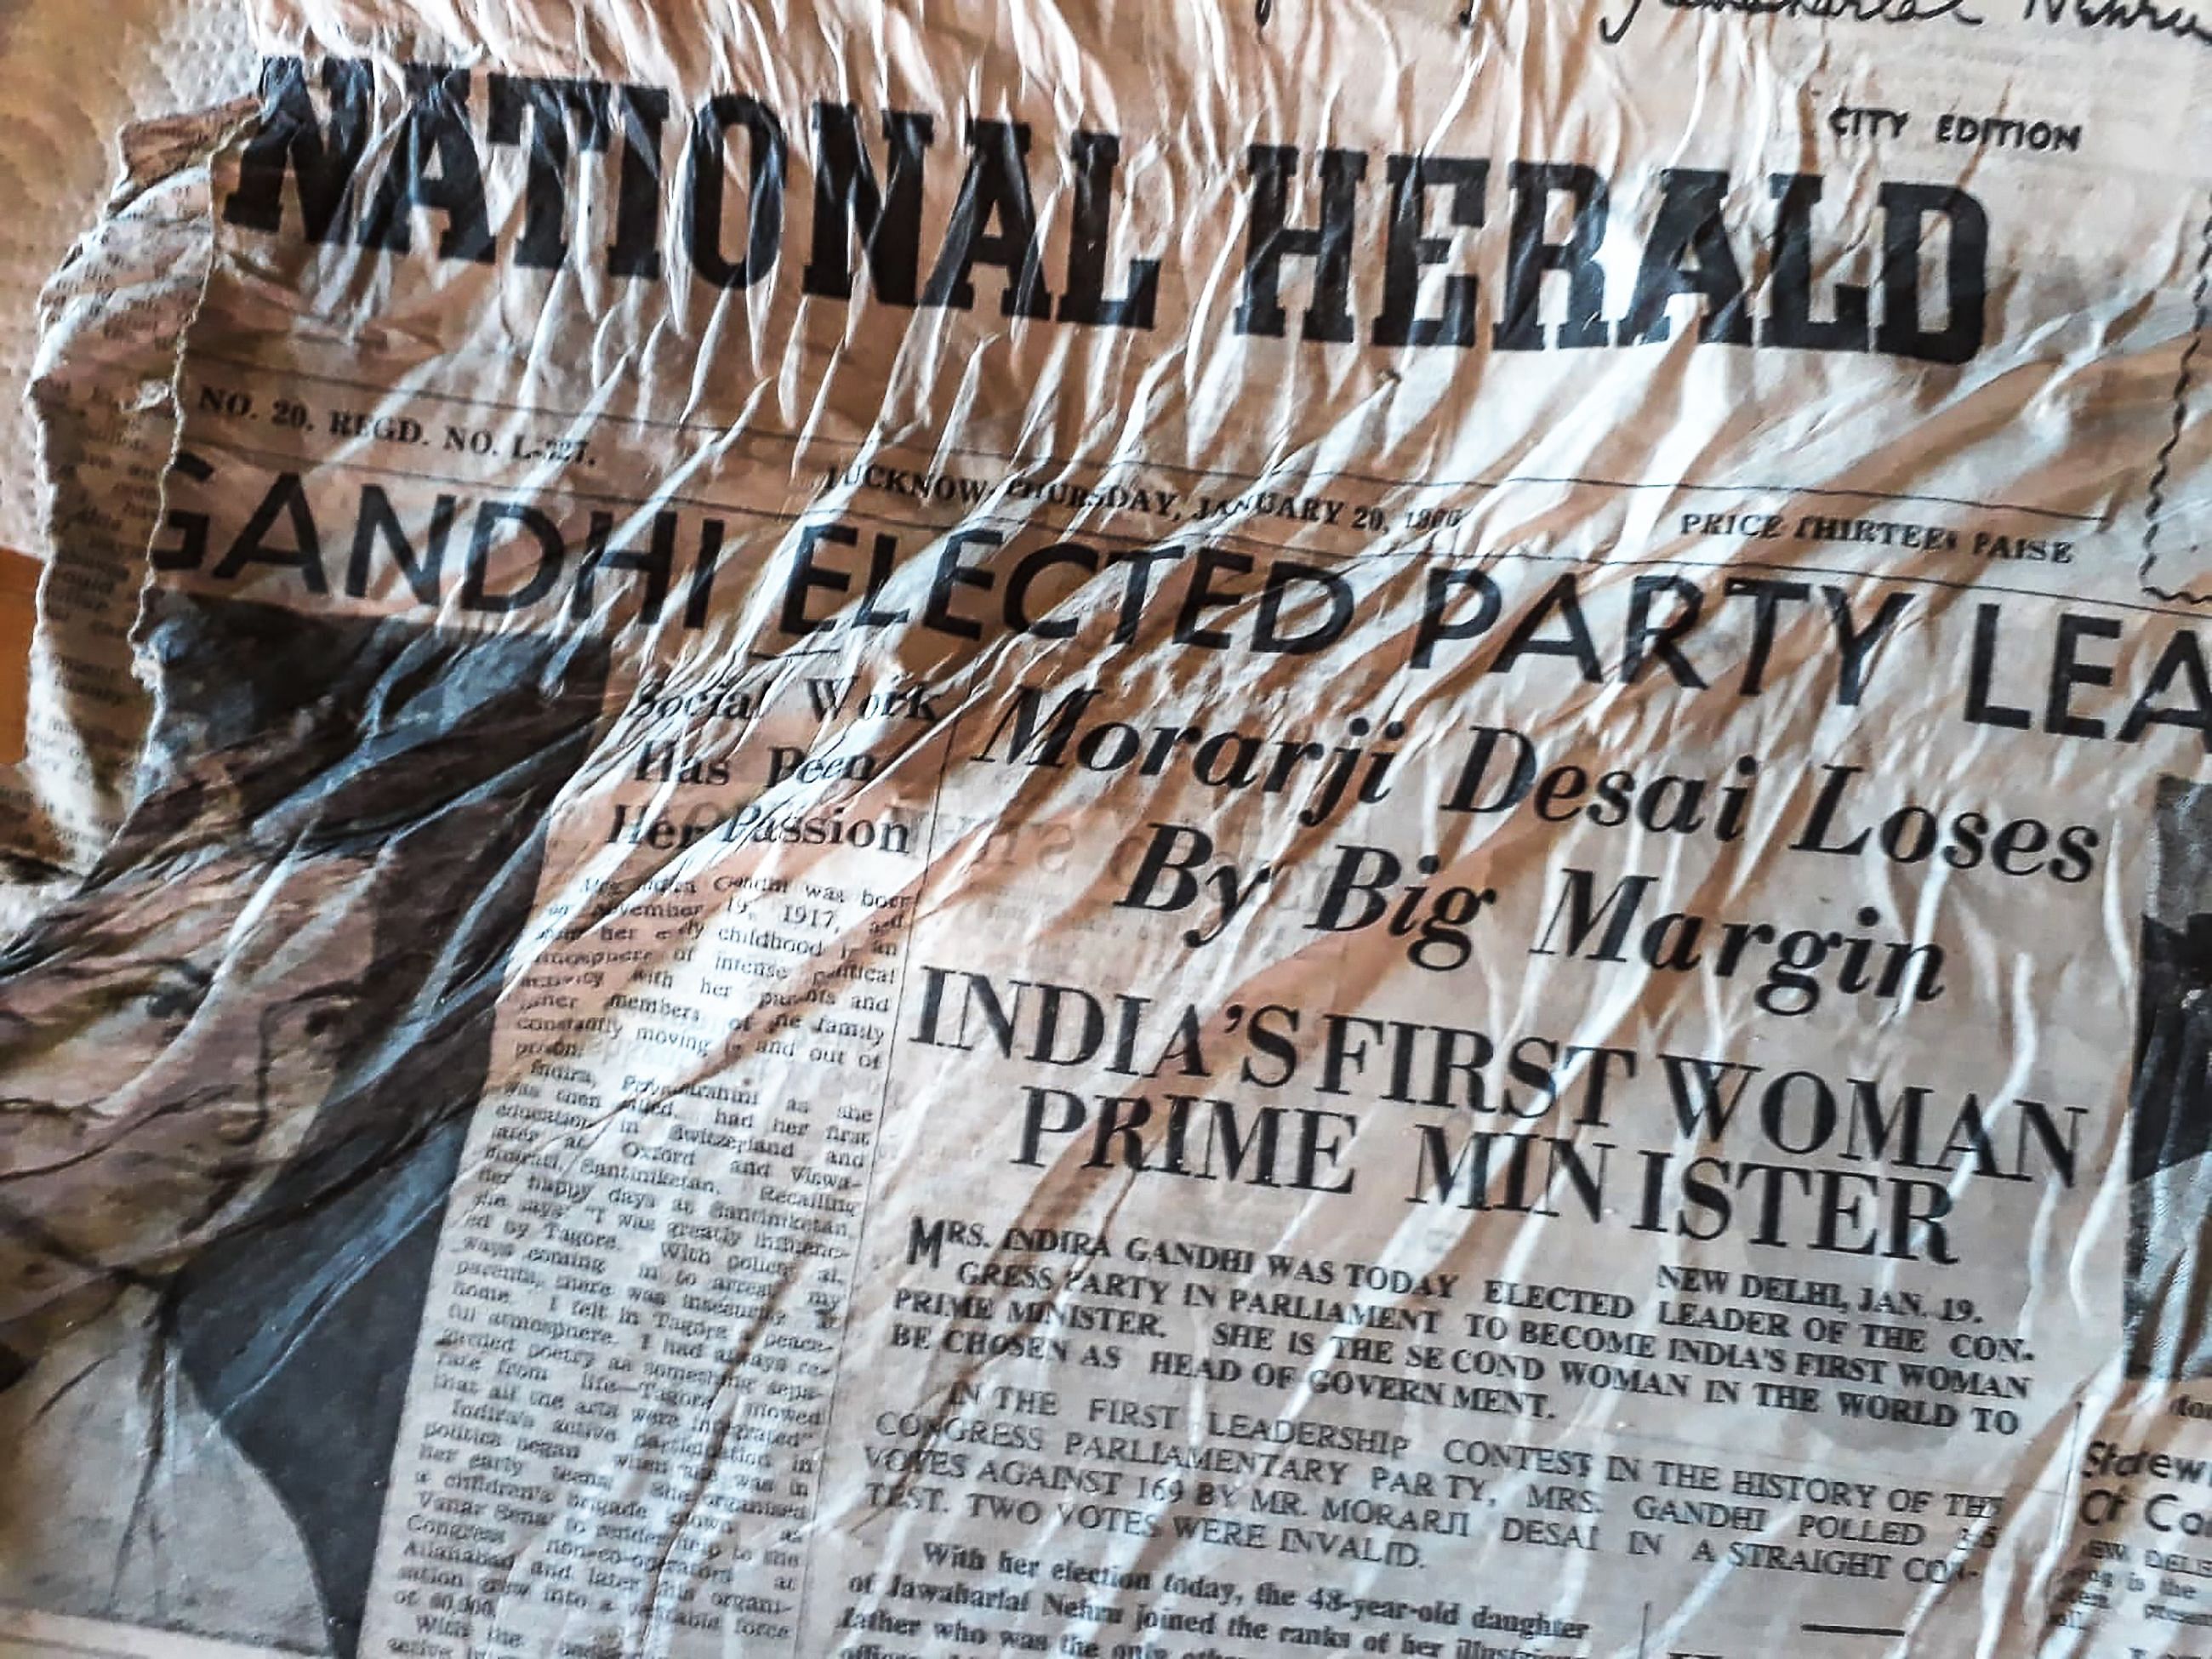 A 1966 copy of Indian newspaper The Statesman with a headline announcing the election of Indira Gandhi, likely to have been on board the Air India Boeing 707 "Kangchenjunga" aircraft that crashed in the nearby Mont Blanc massif on January 24, 1966. Credit: AFP Photo